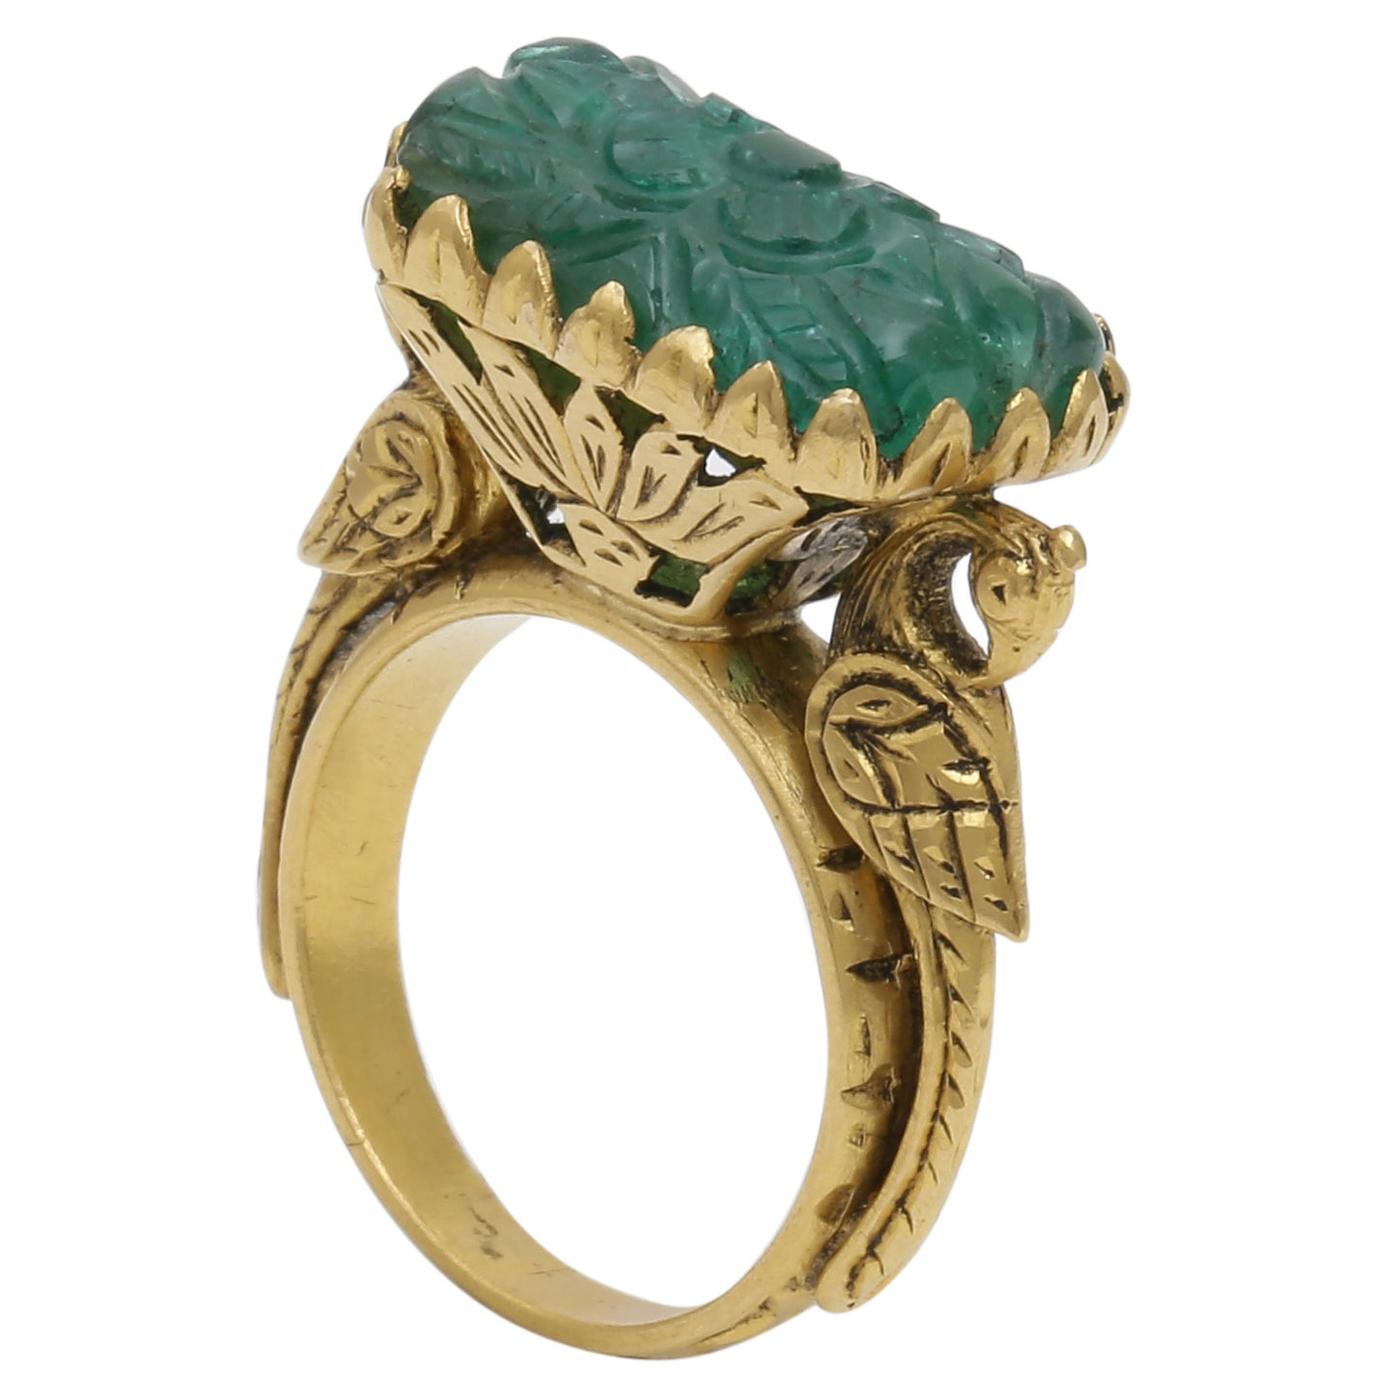 Carved Emerald Ring with Intricate Work Handcrafted Work in 22 Karat Yellow Gold